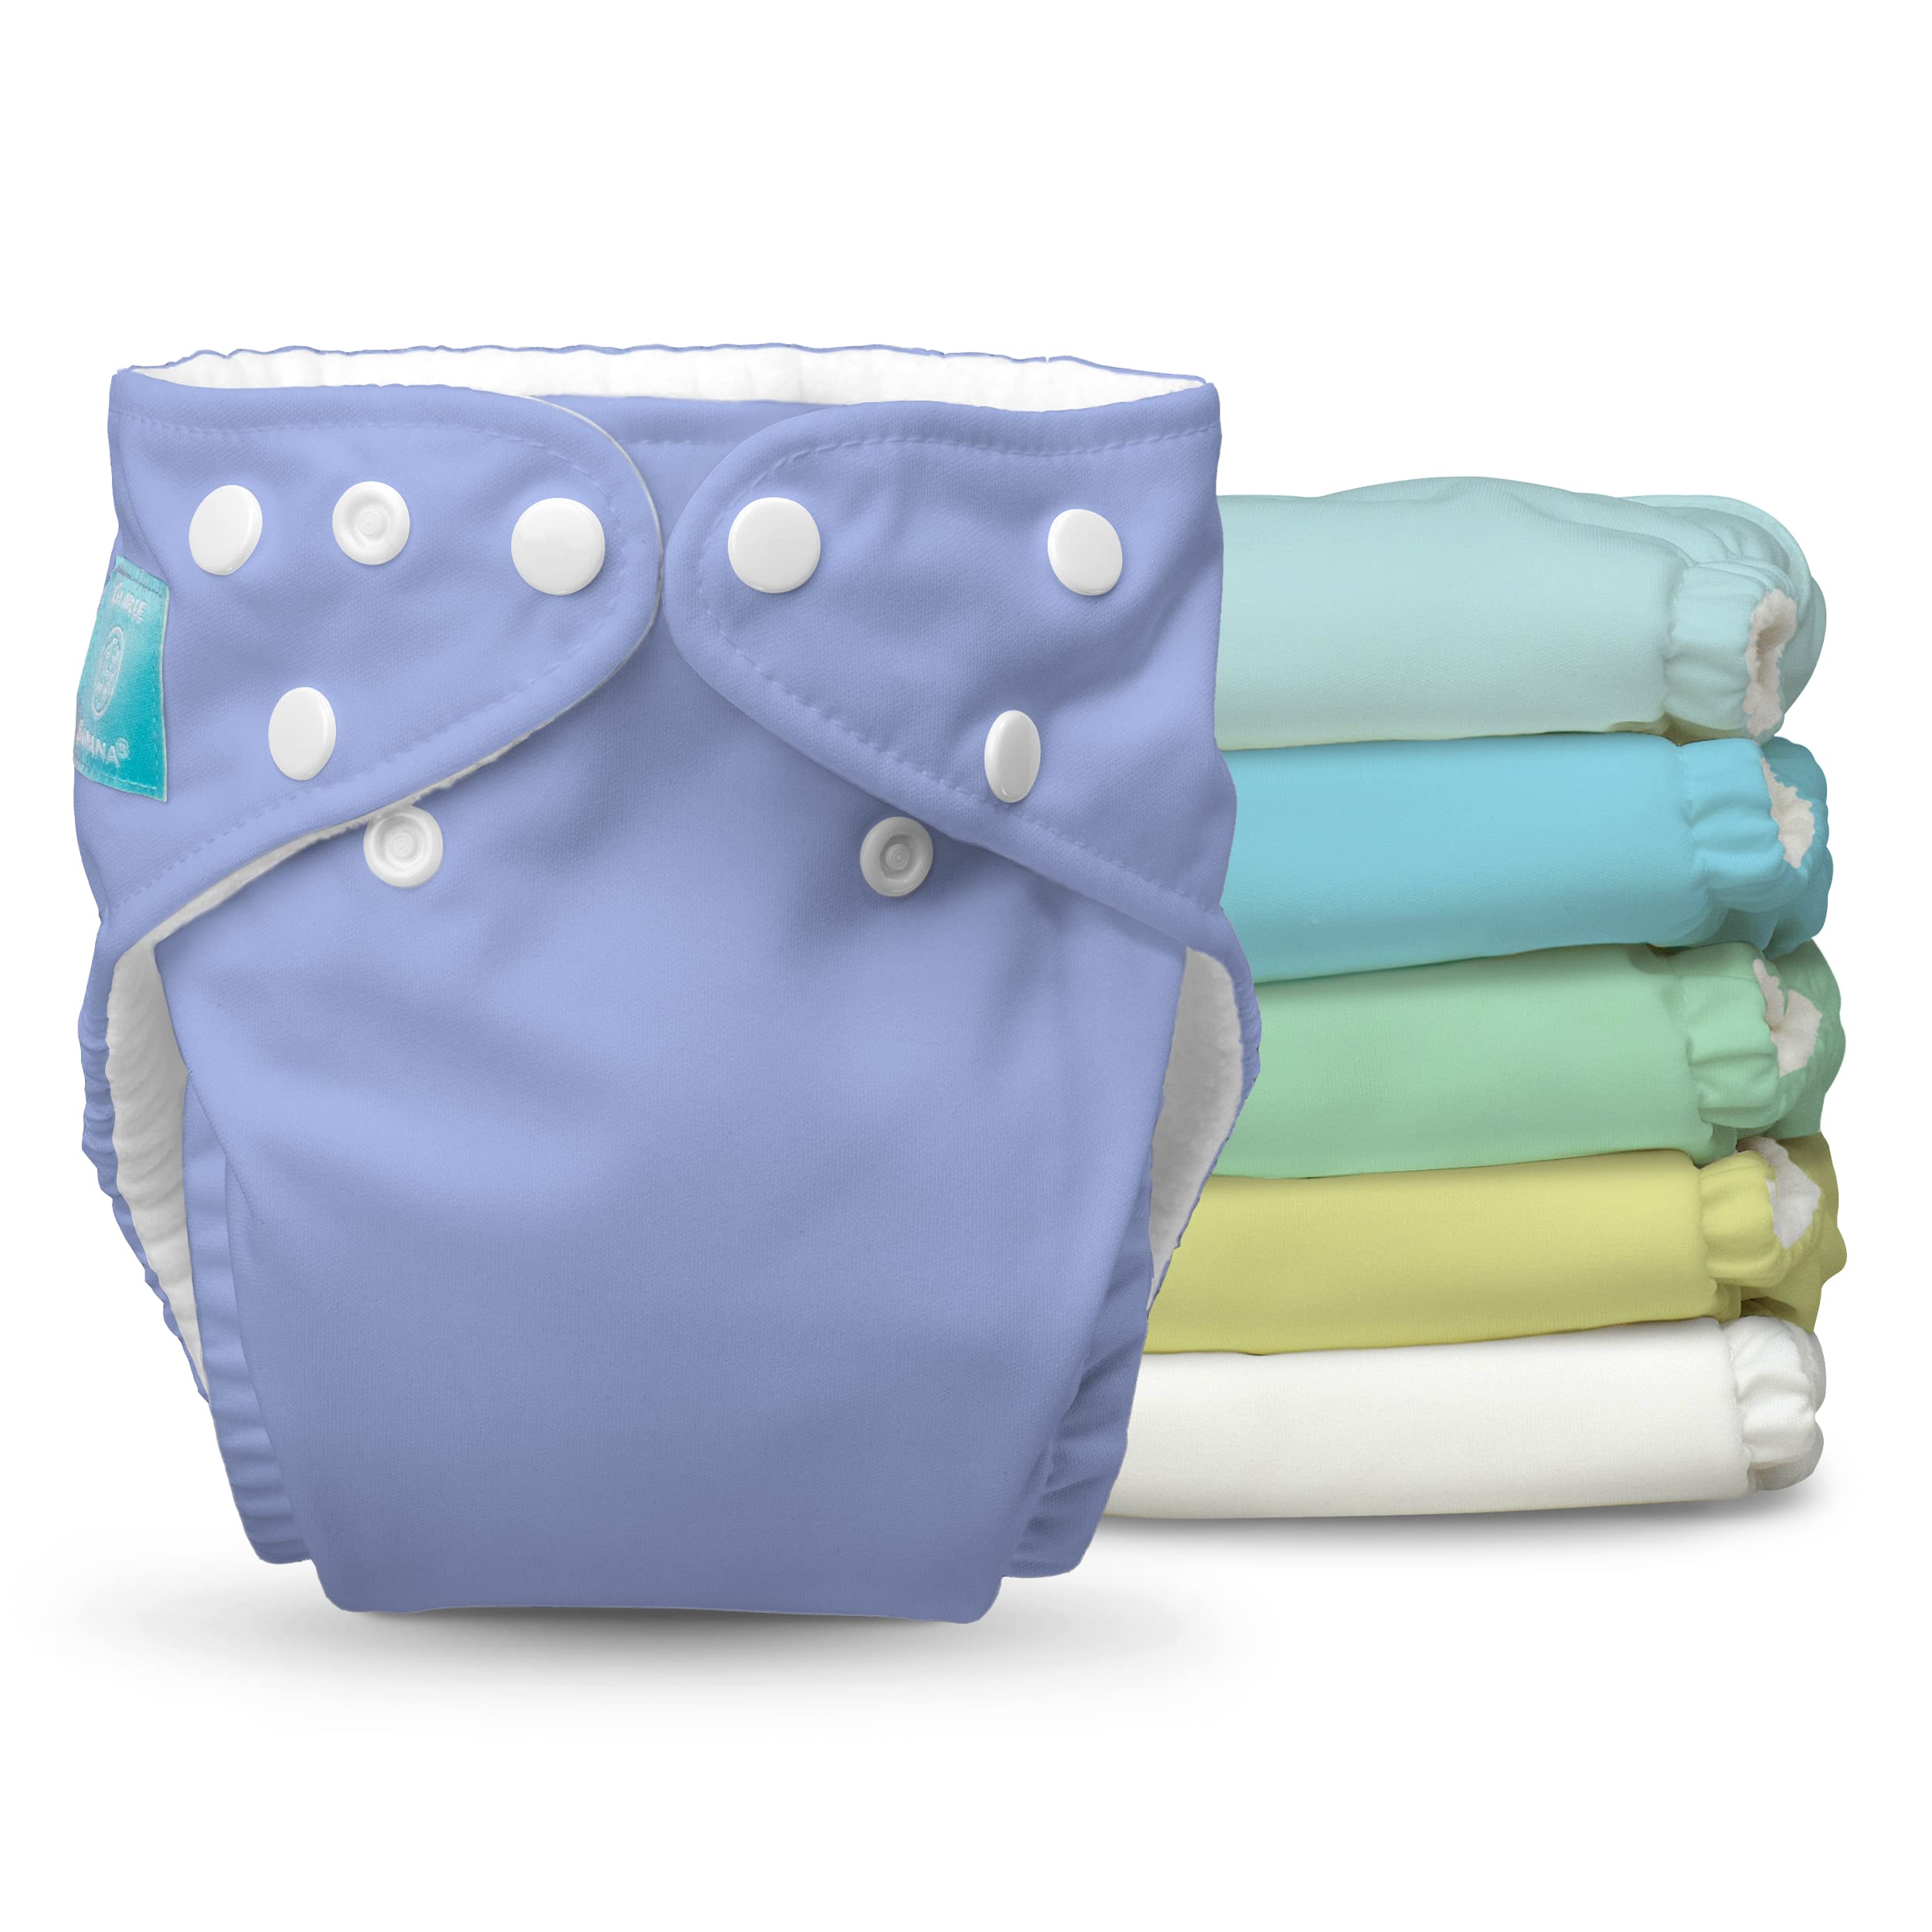 Charlie Banana Baby 2-in-1 Reusable Fleece Cloth Diapering System, Reusable and Washable, 6 Diapers and 12 Inserts, One Size, Unisex Pastel